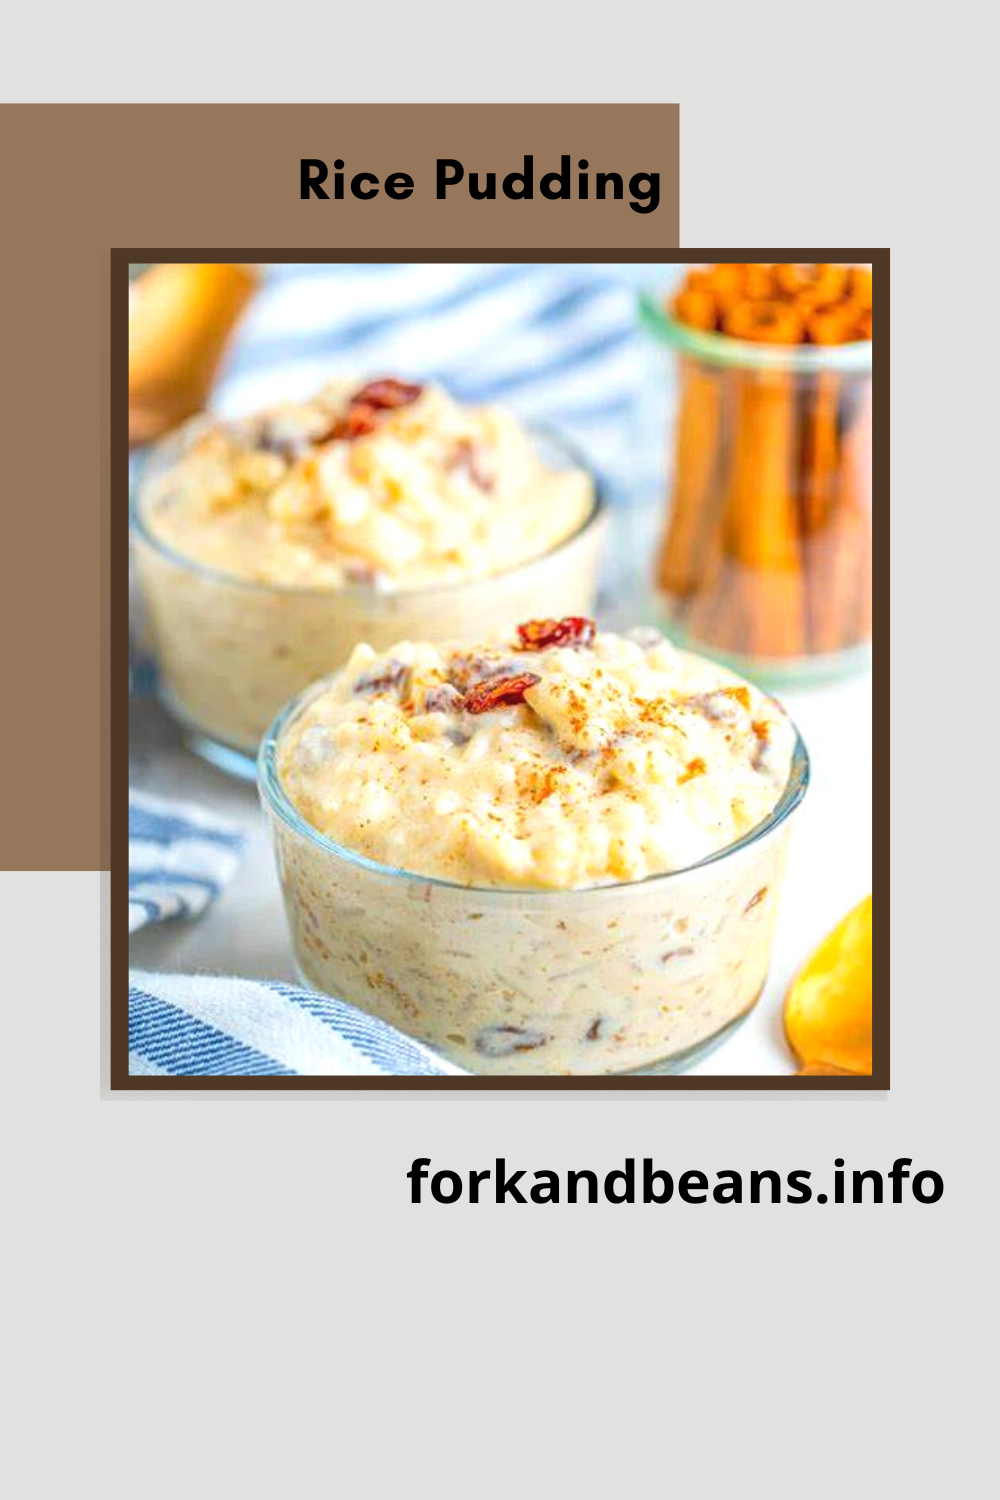 AN EASY RICE PUDDING RECIPE